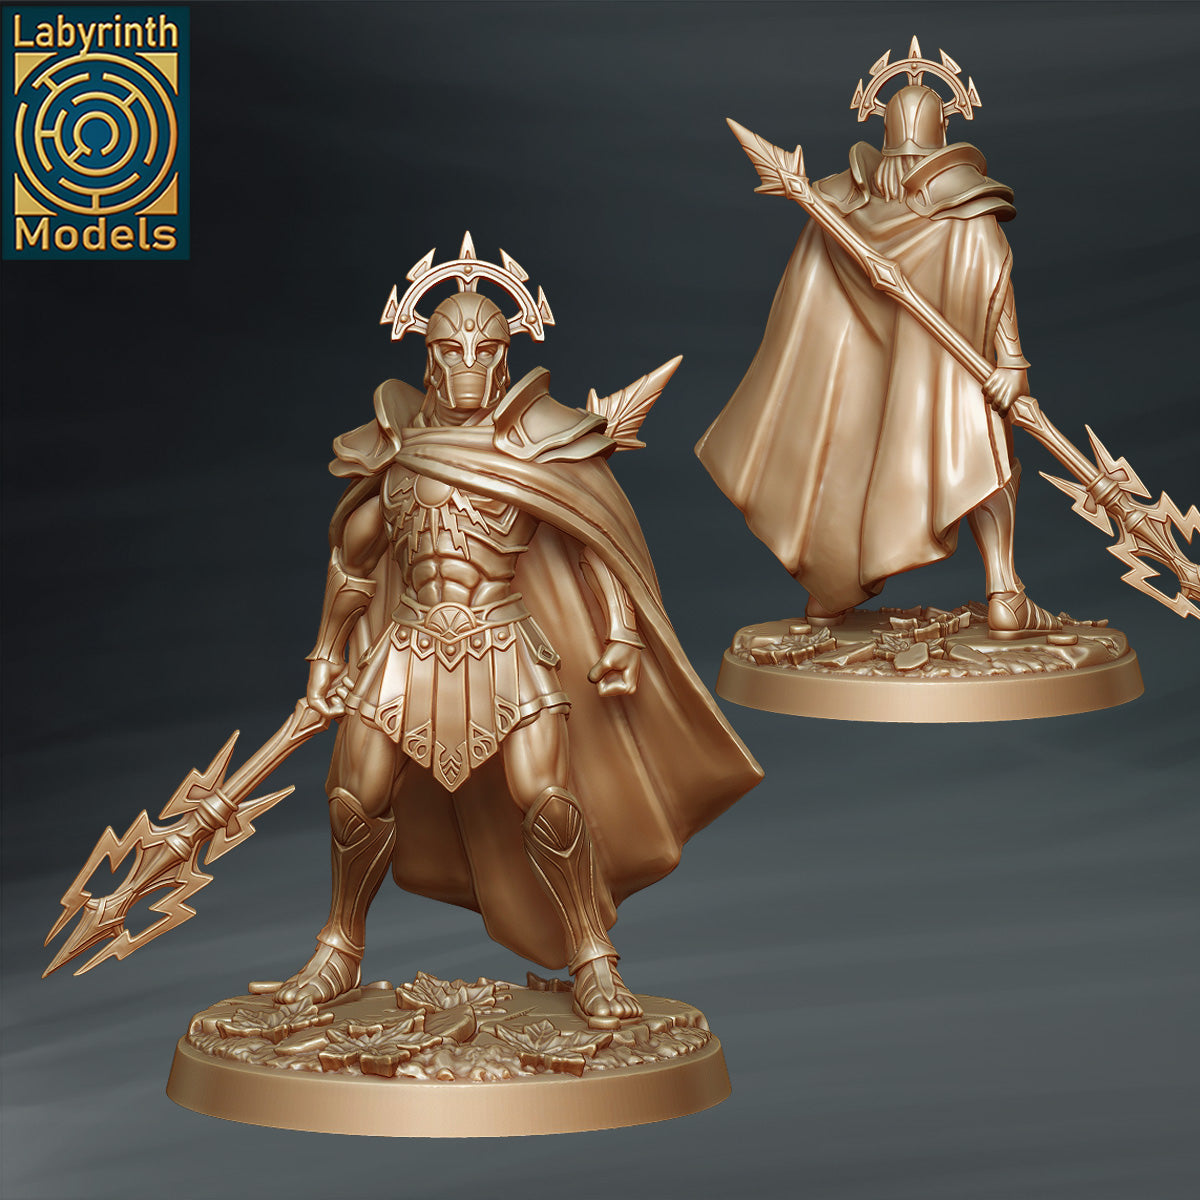 Warriors of Zeus by Labyrinth Models